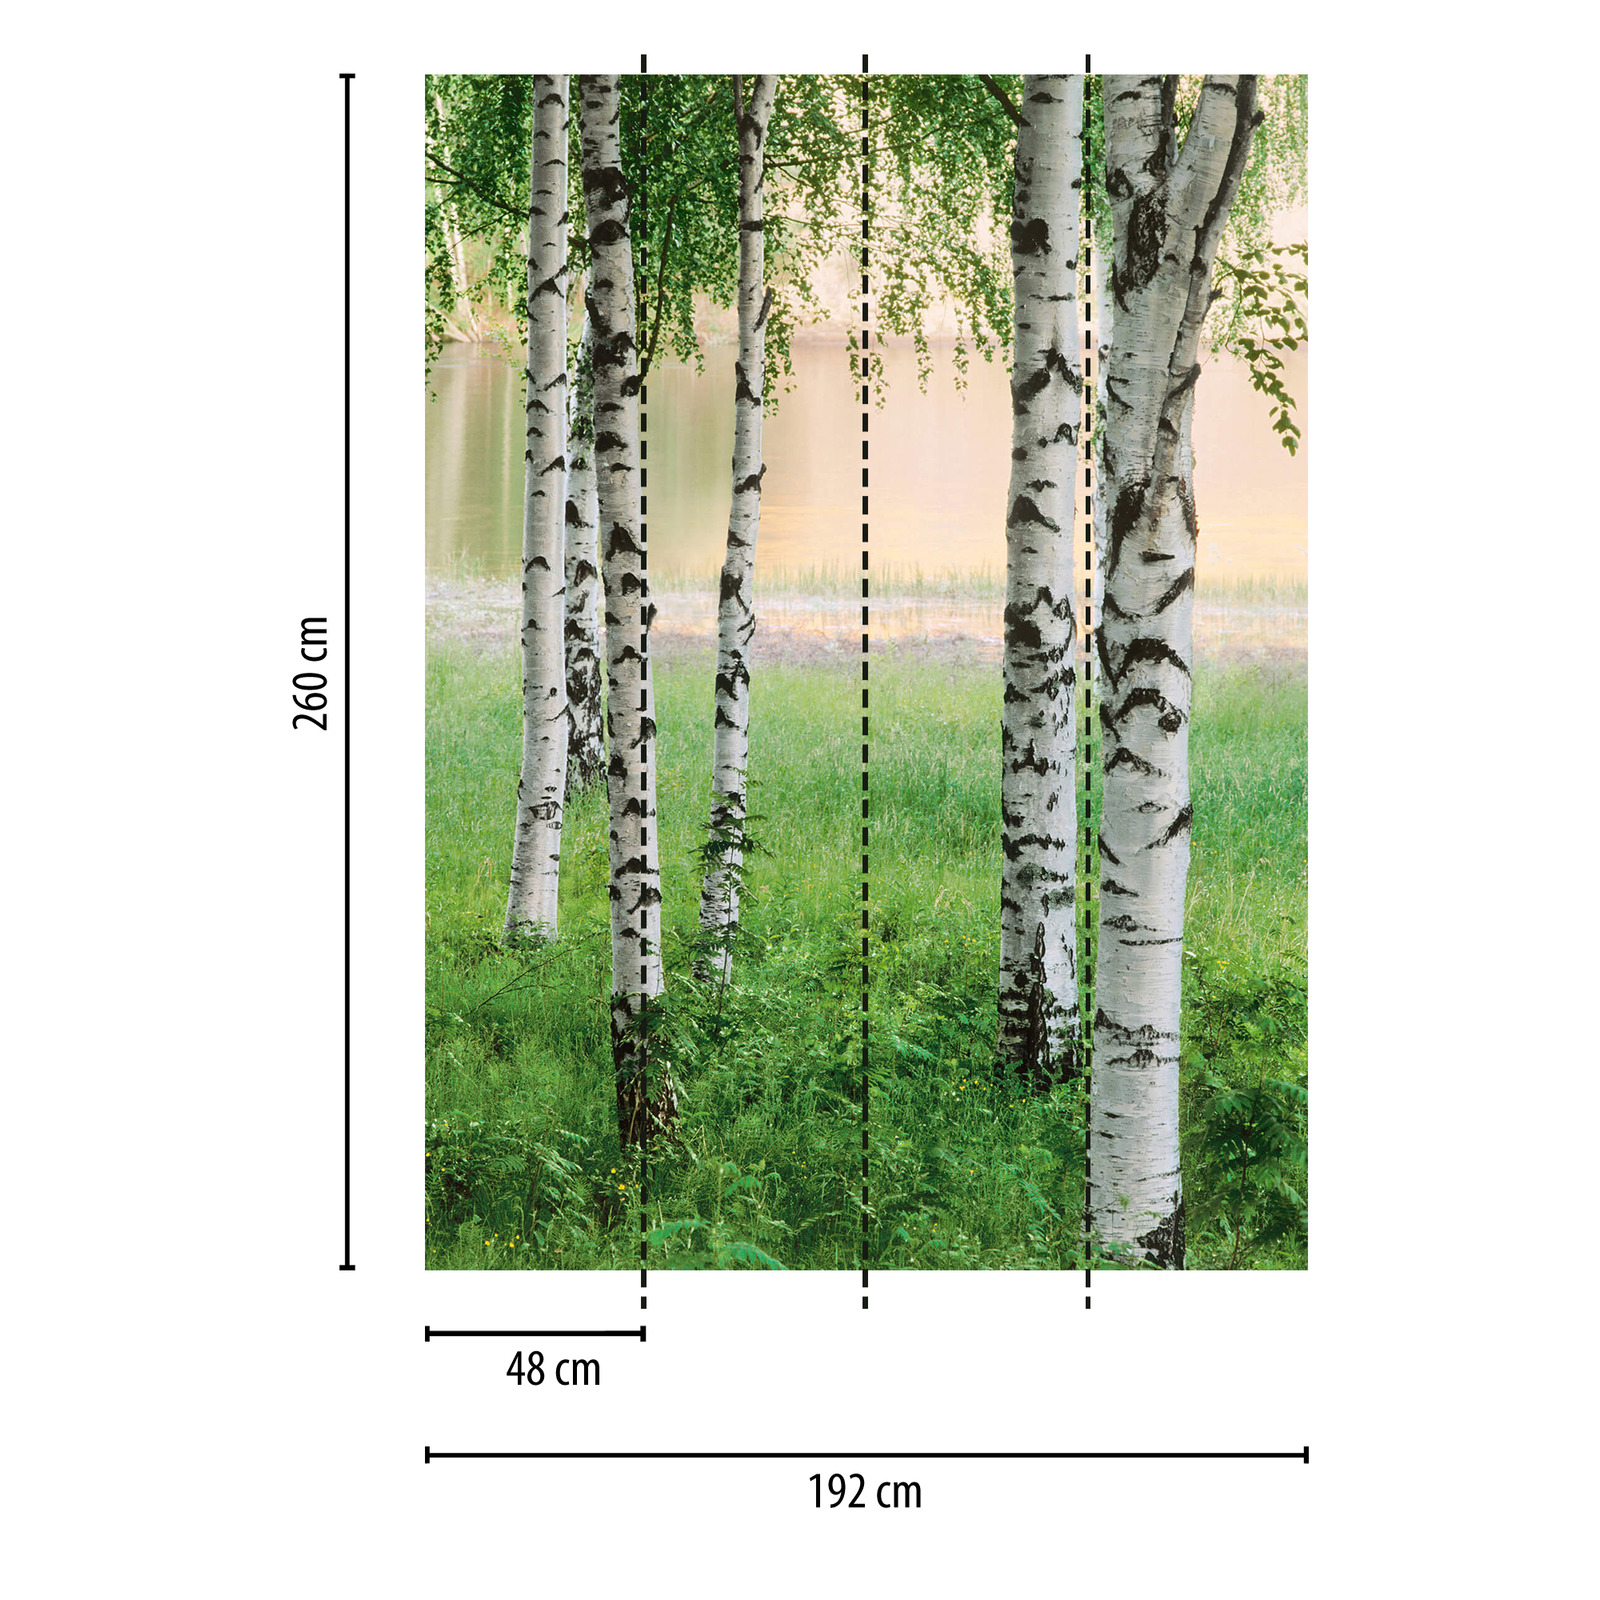             Birch forest photo wallpaper trees by the lake, portrait format
        